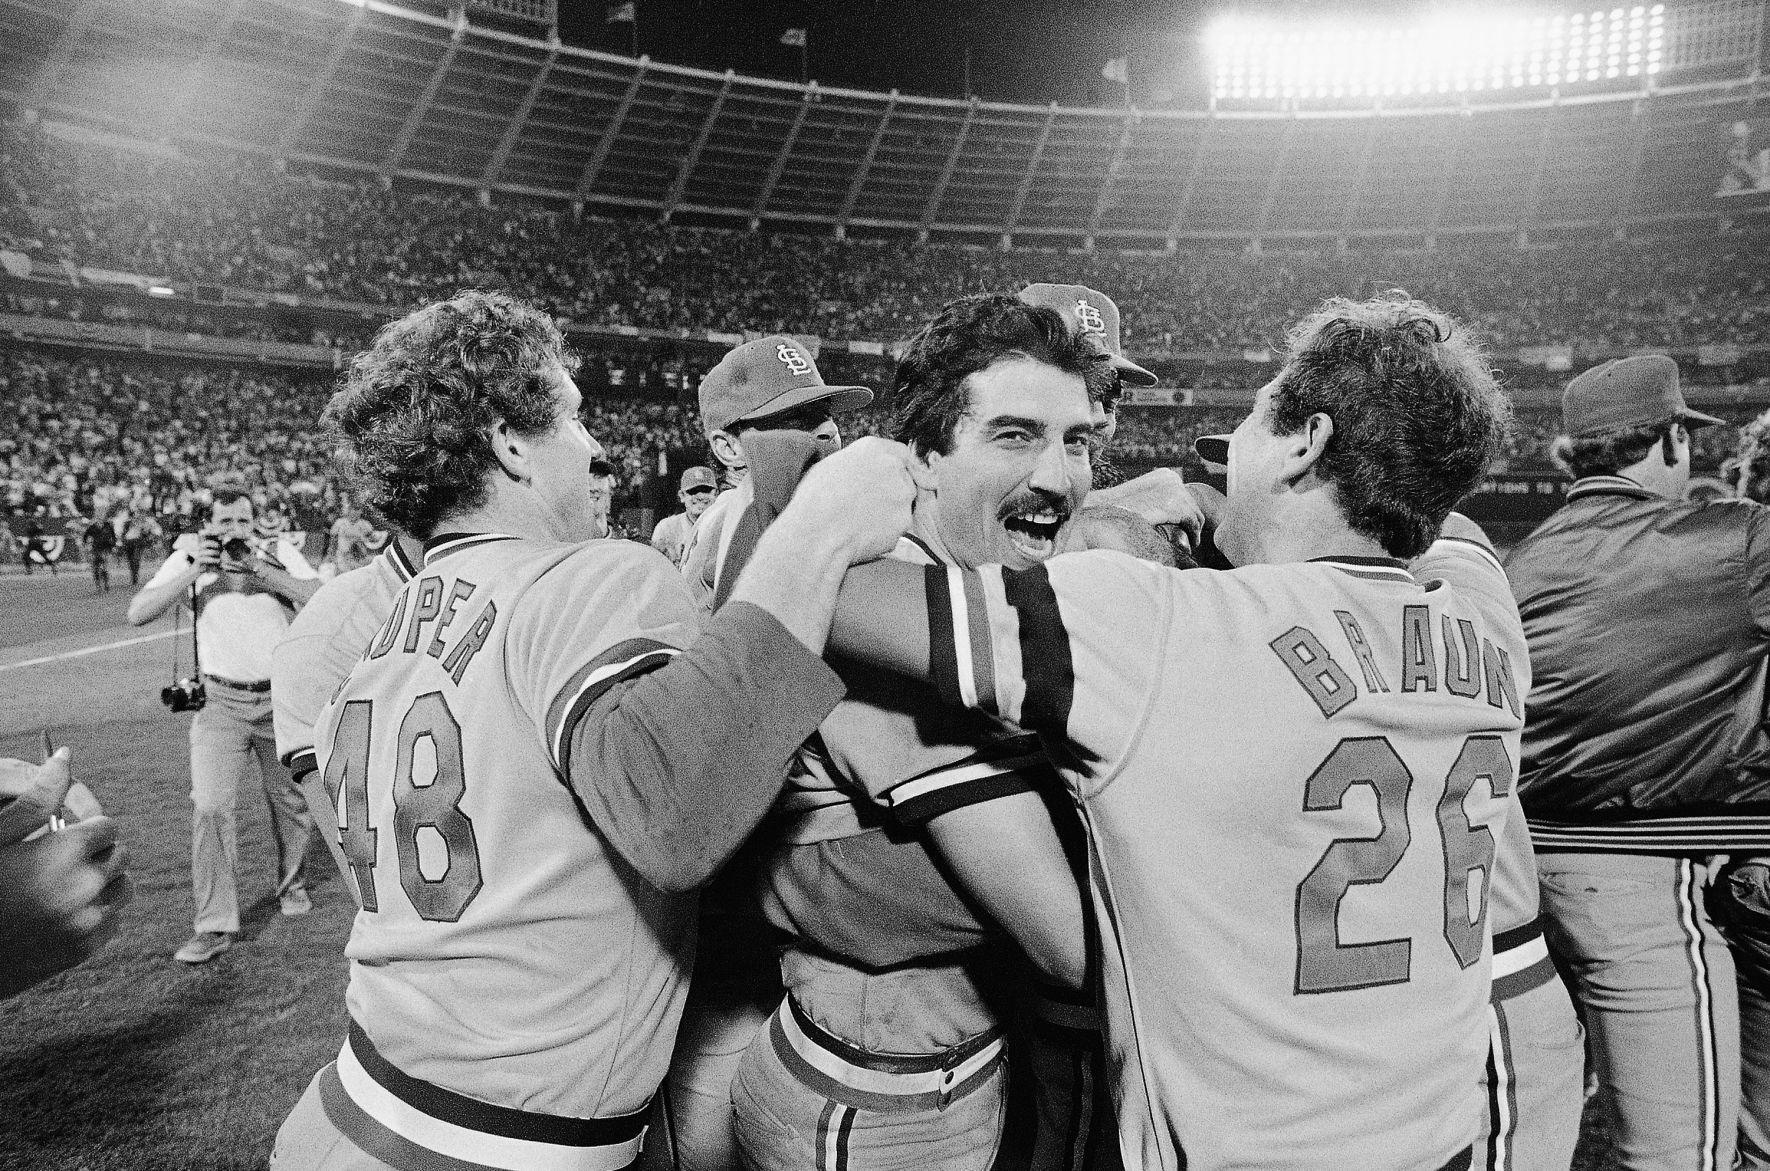 Keith Hernandez stopped to buy a pretzel in the middle of another Mets loss